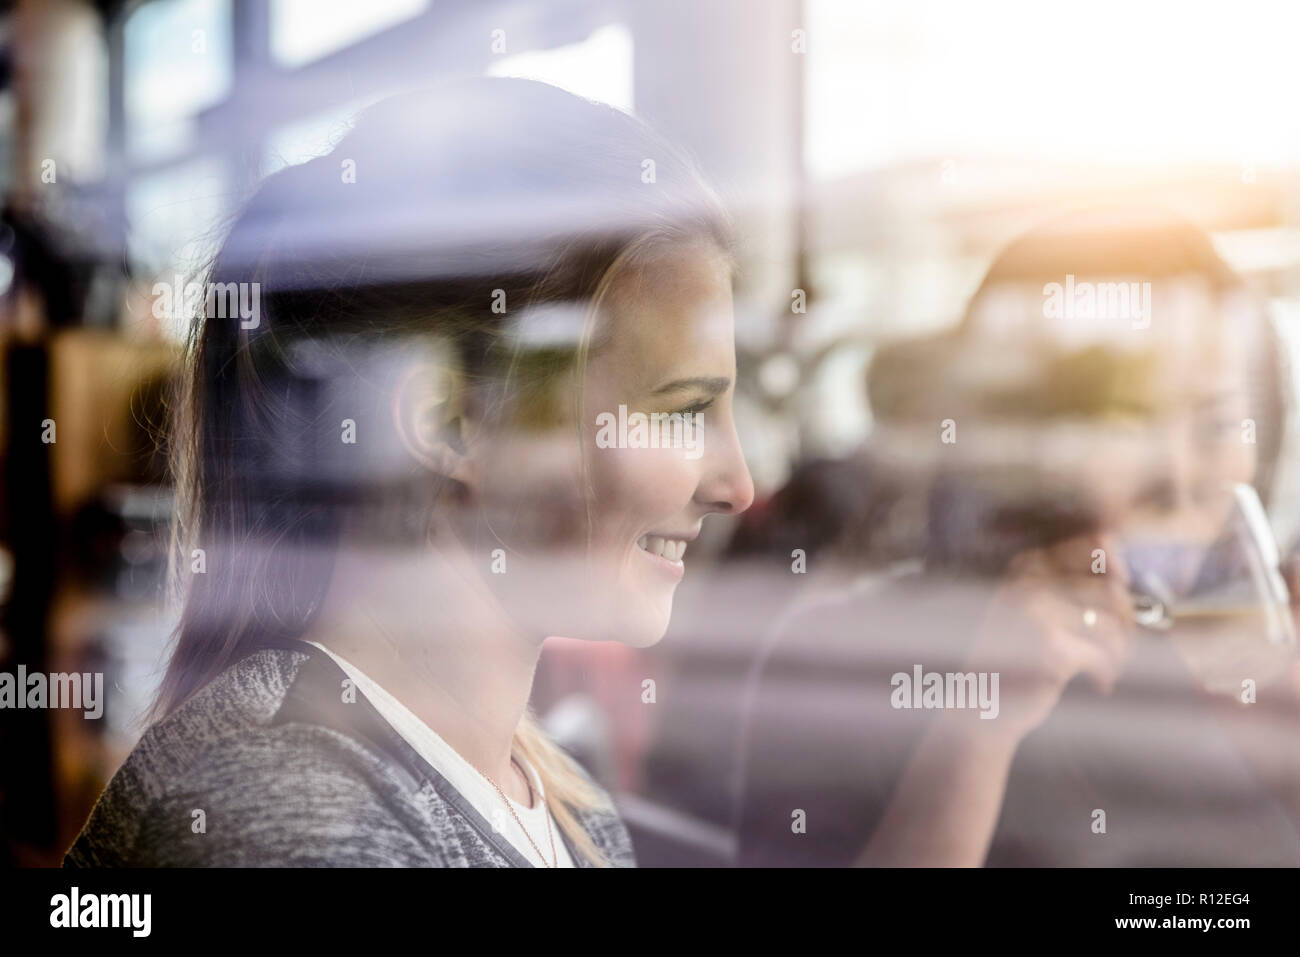 Two female students having coffee in cafe window seat Stock Photo